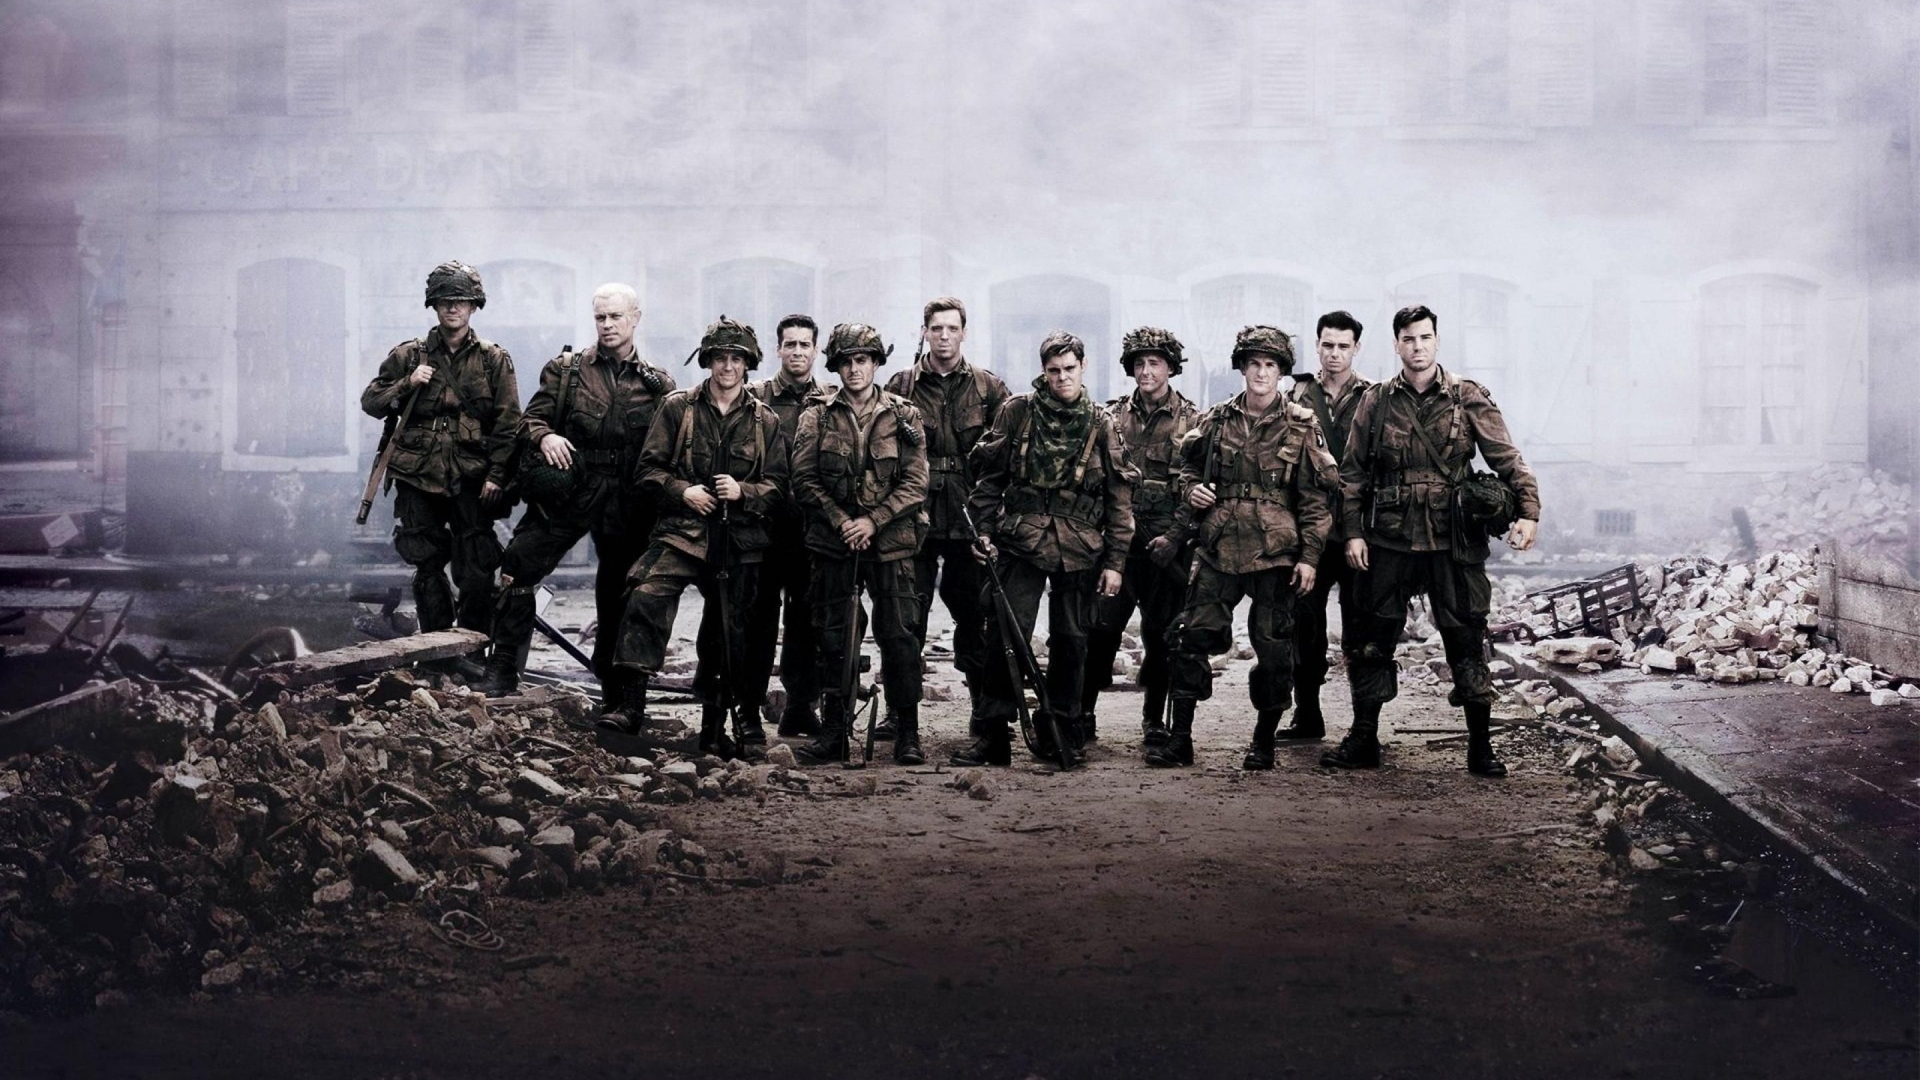 Band of Brothers Cast for 1920 x 1080 HDTV 1080p resolution